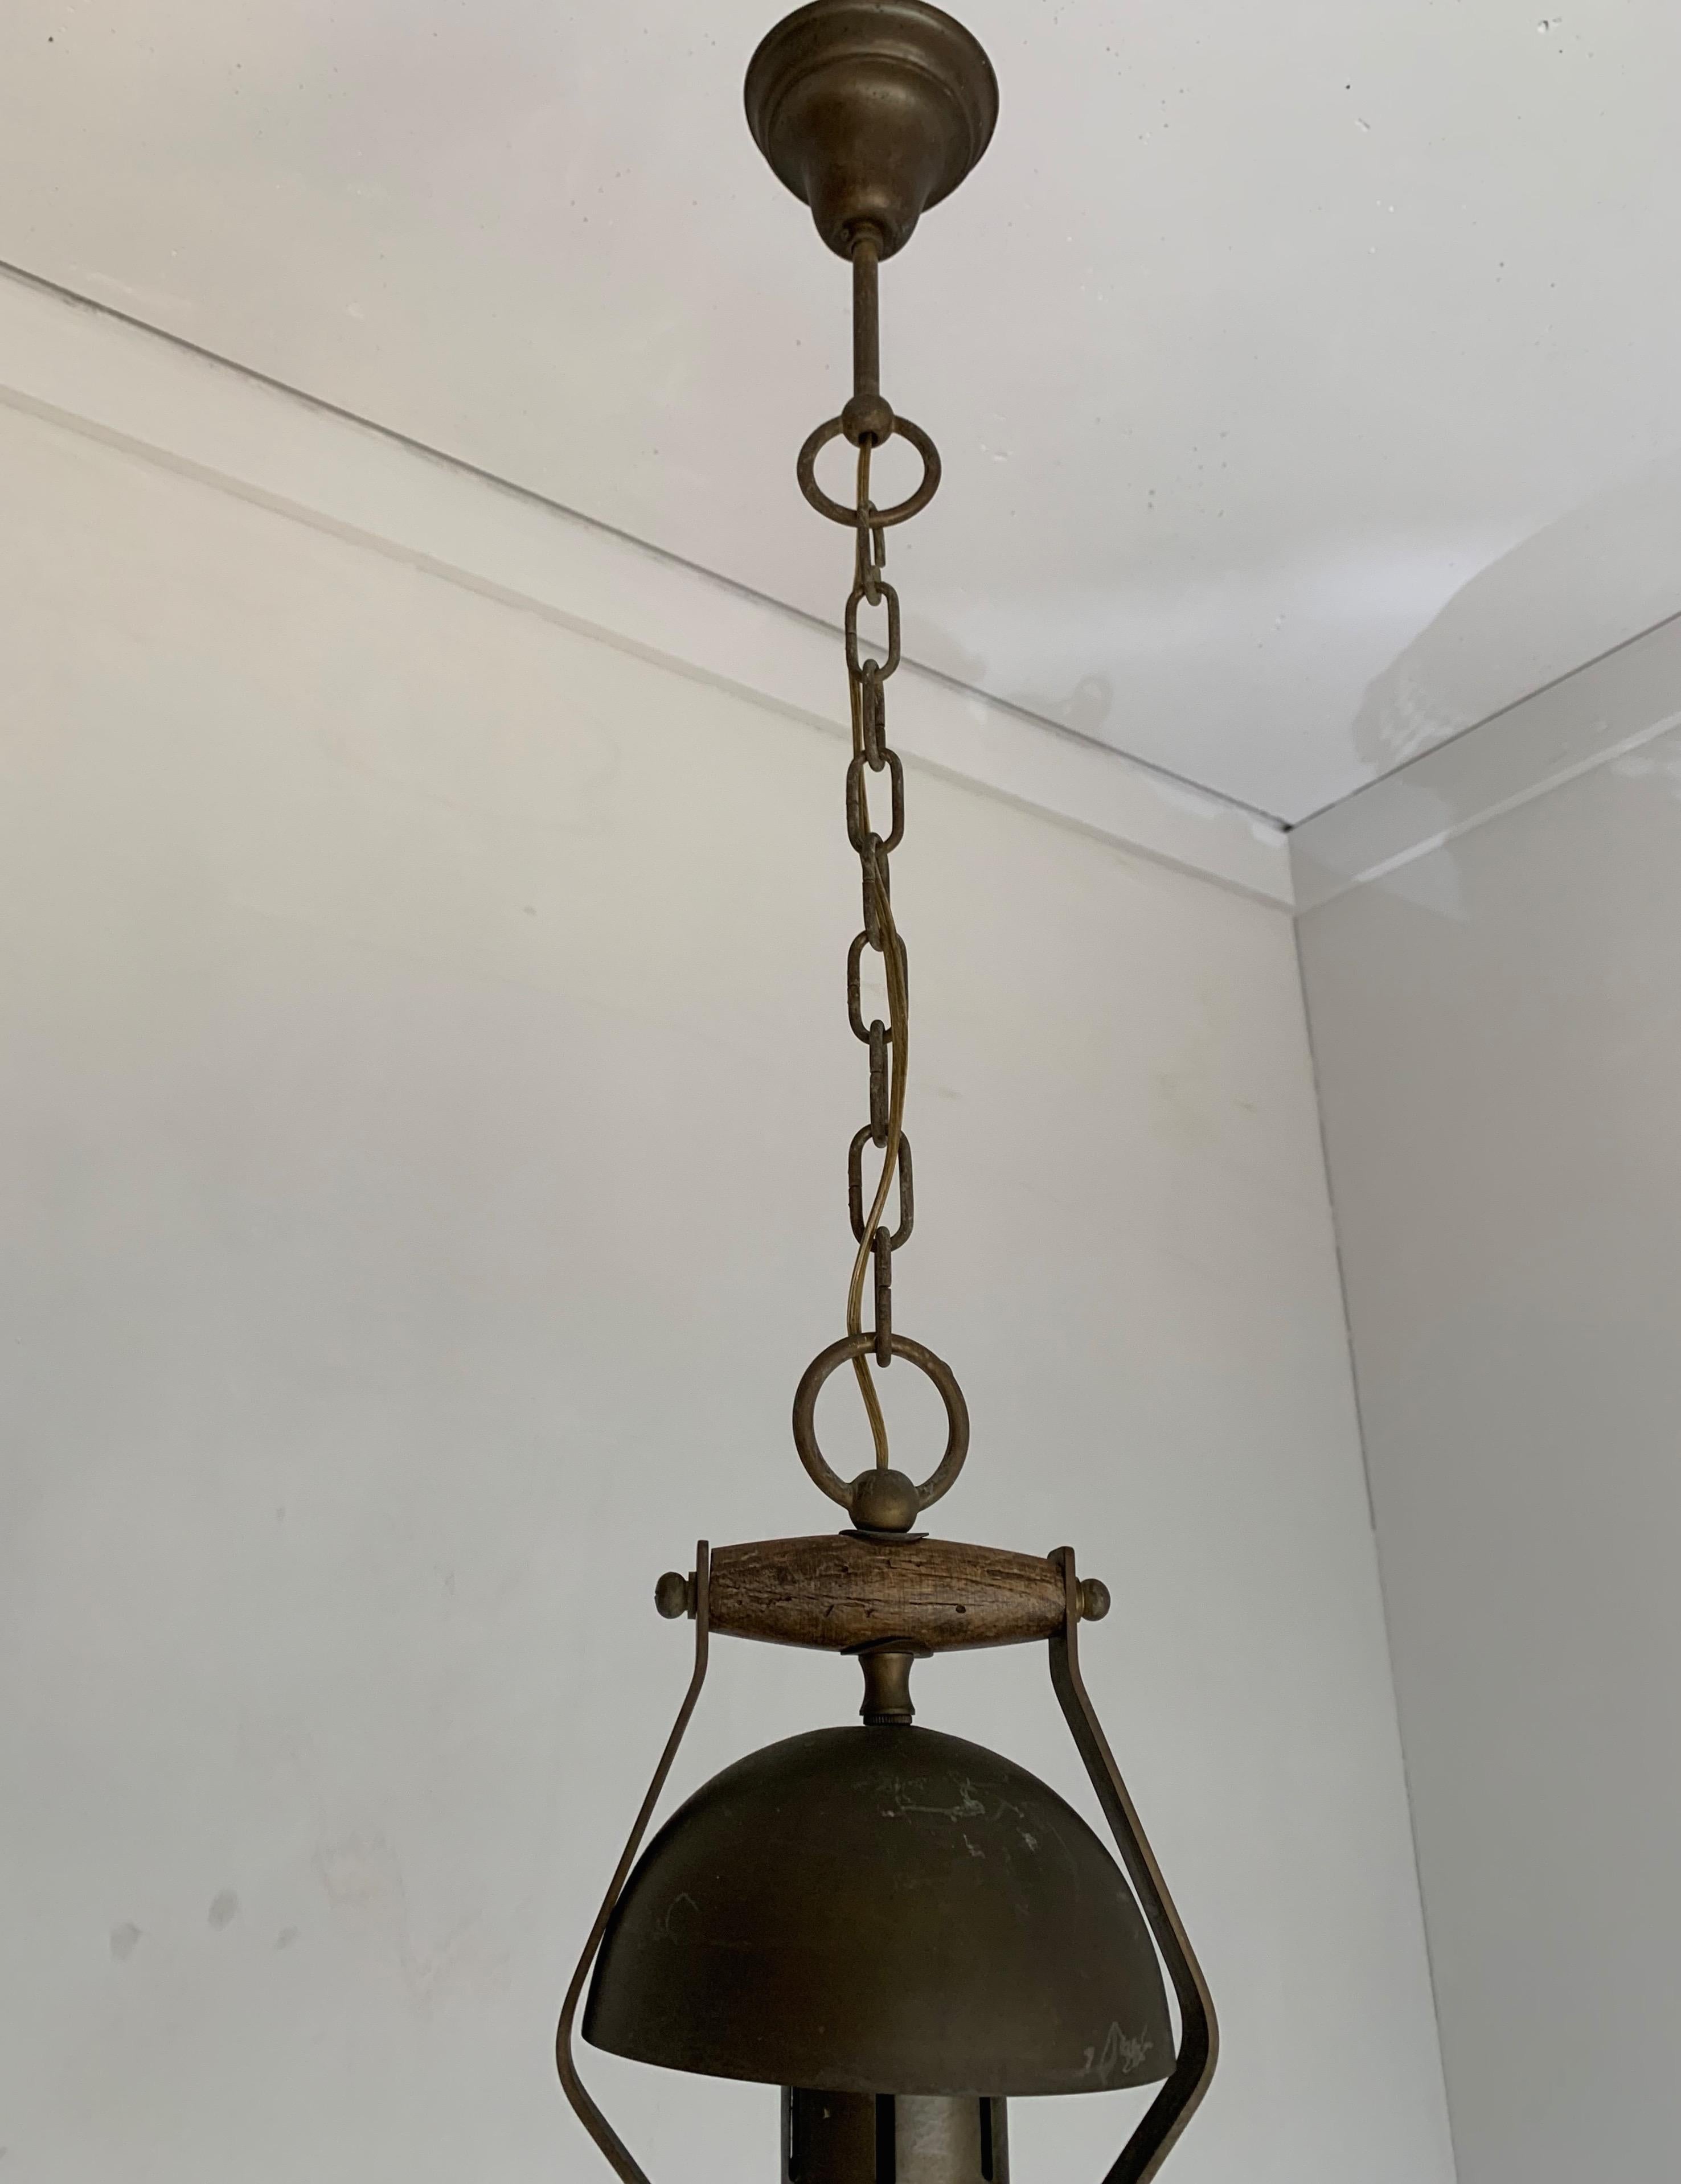 Hand-Crafted Rare, Midcentury Made Brass and Glass Ship Pendant Light / Storm Lantern Design